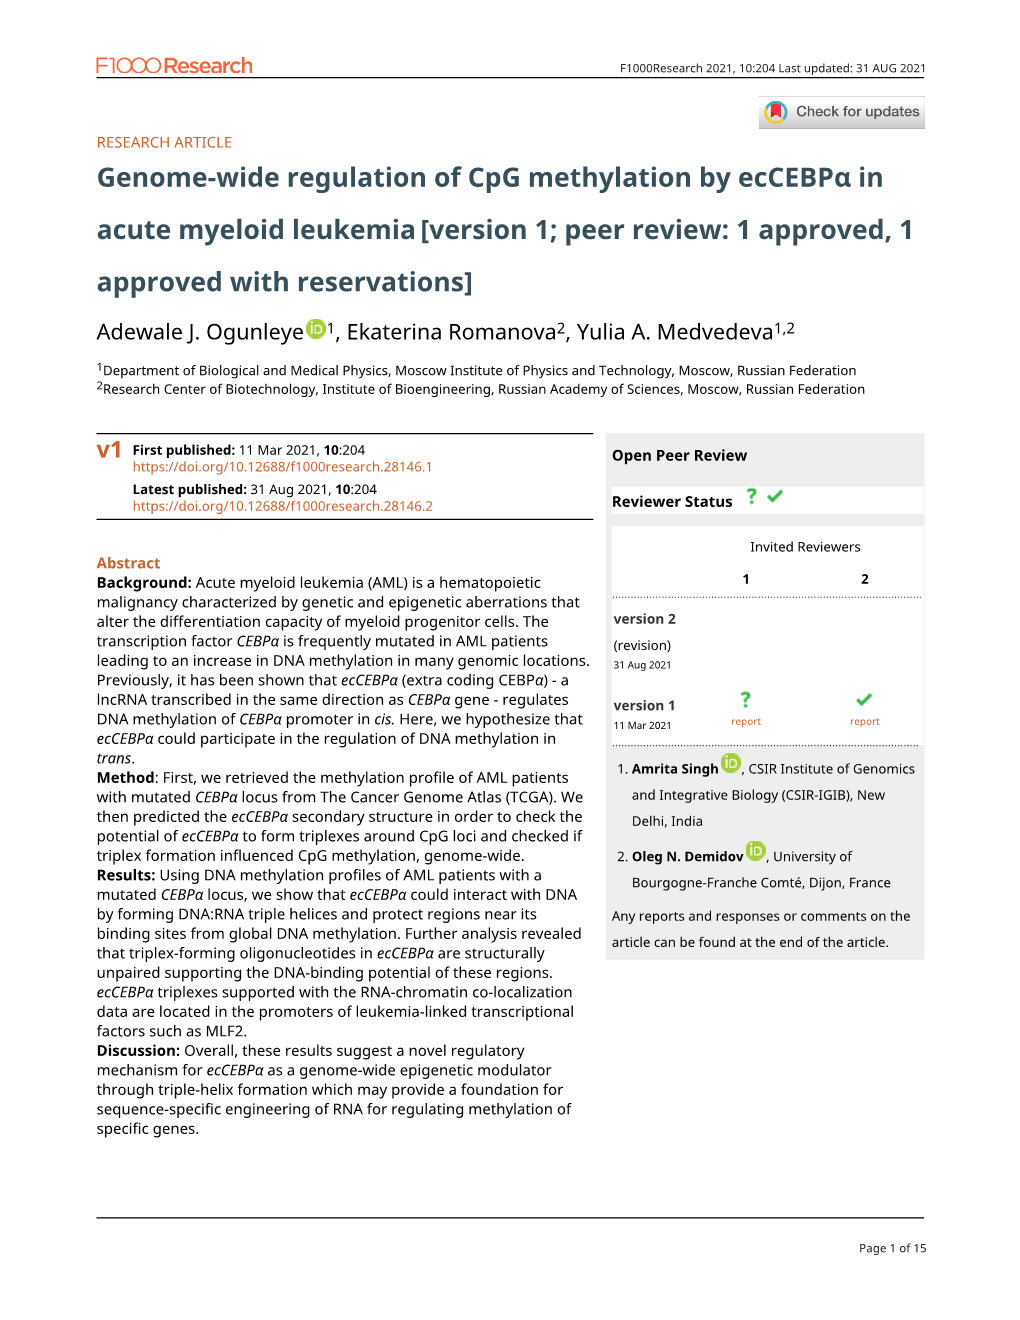 Genome-Wide Regulation of Cpg Methylation by Eccebpα in Acute Myeloid Leukemia [Version 1; Peer Review: 1 Approved, 1 Approved with Reservations]